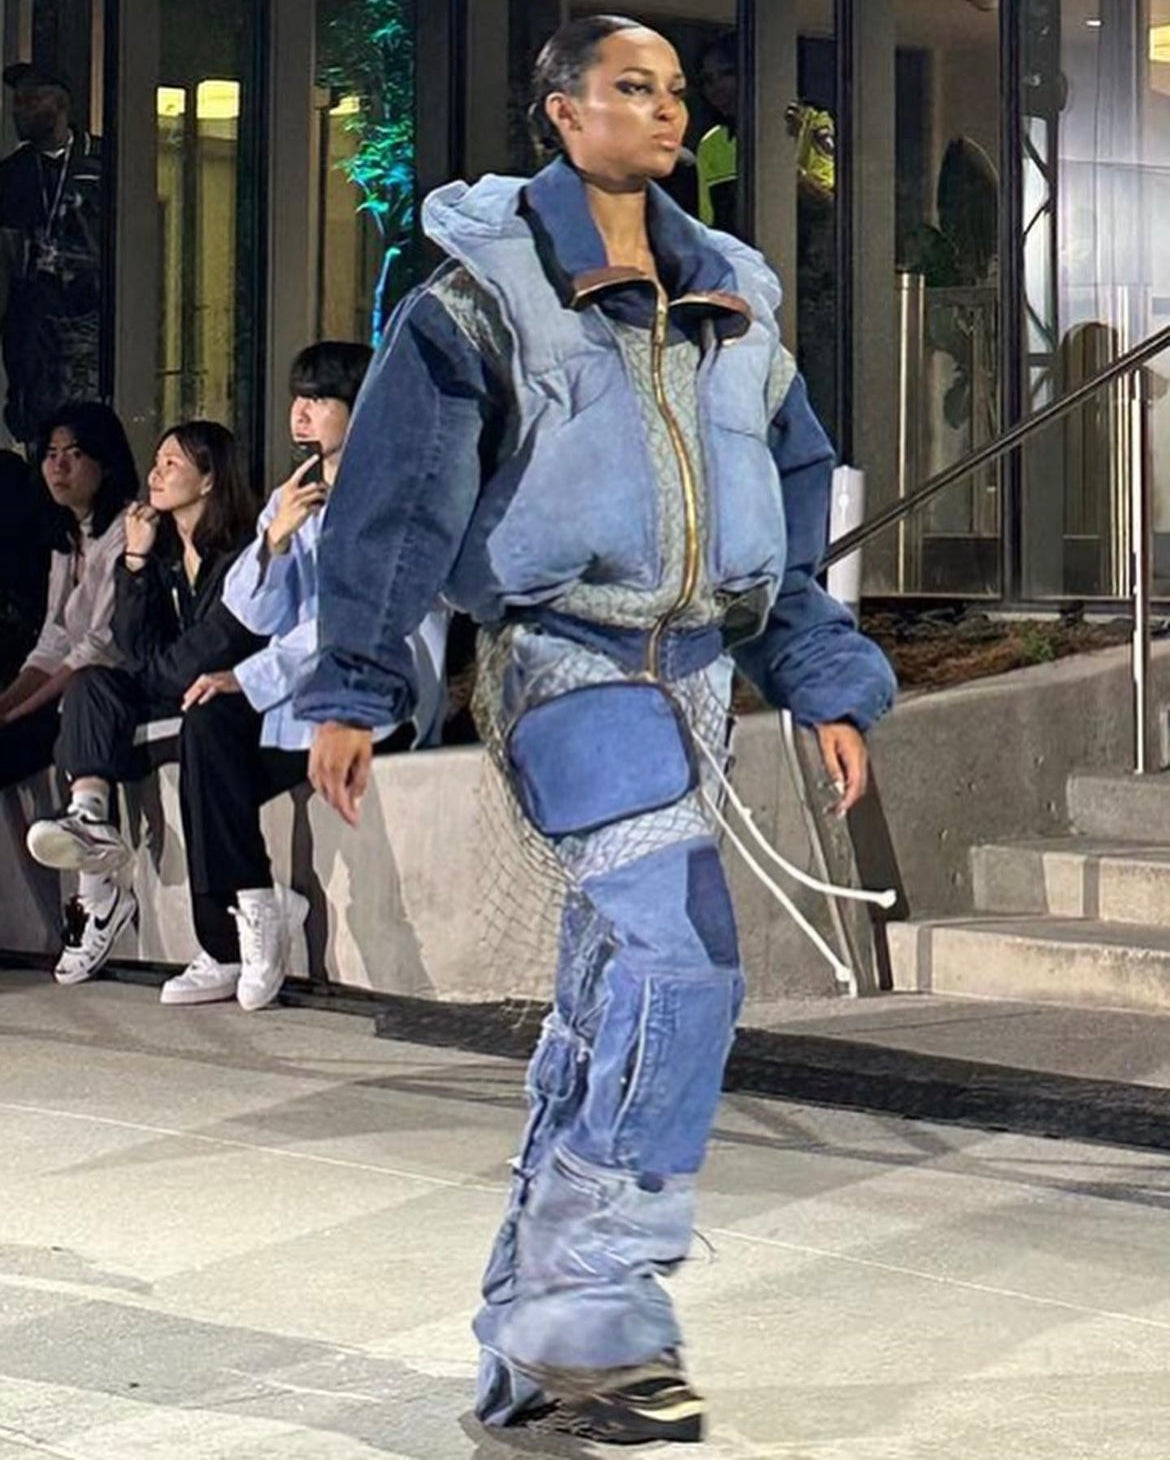 RECONSTRUCTED STACKED DENIM